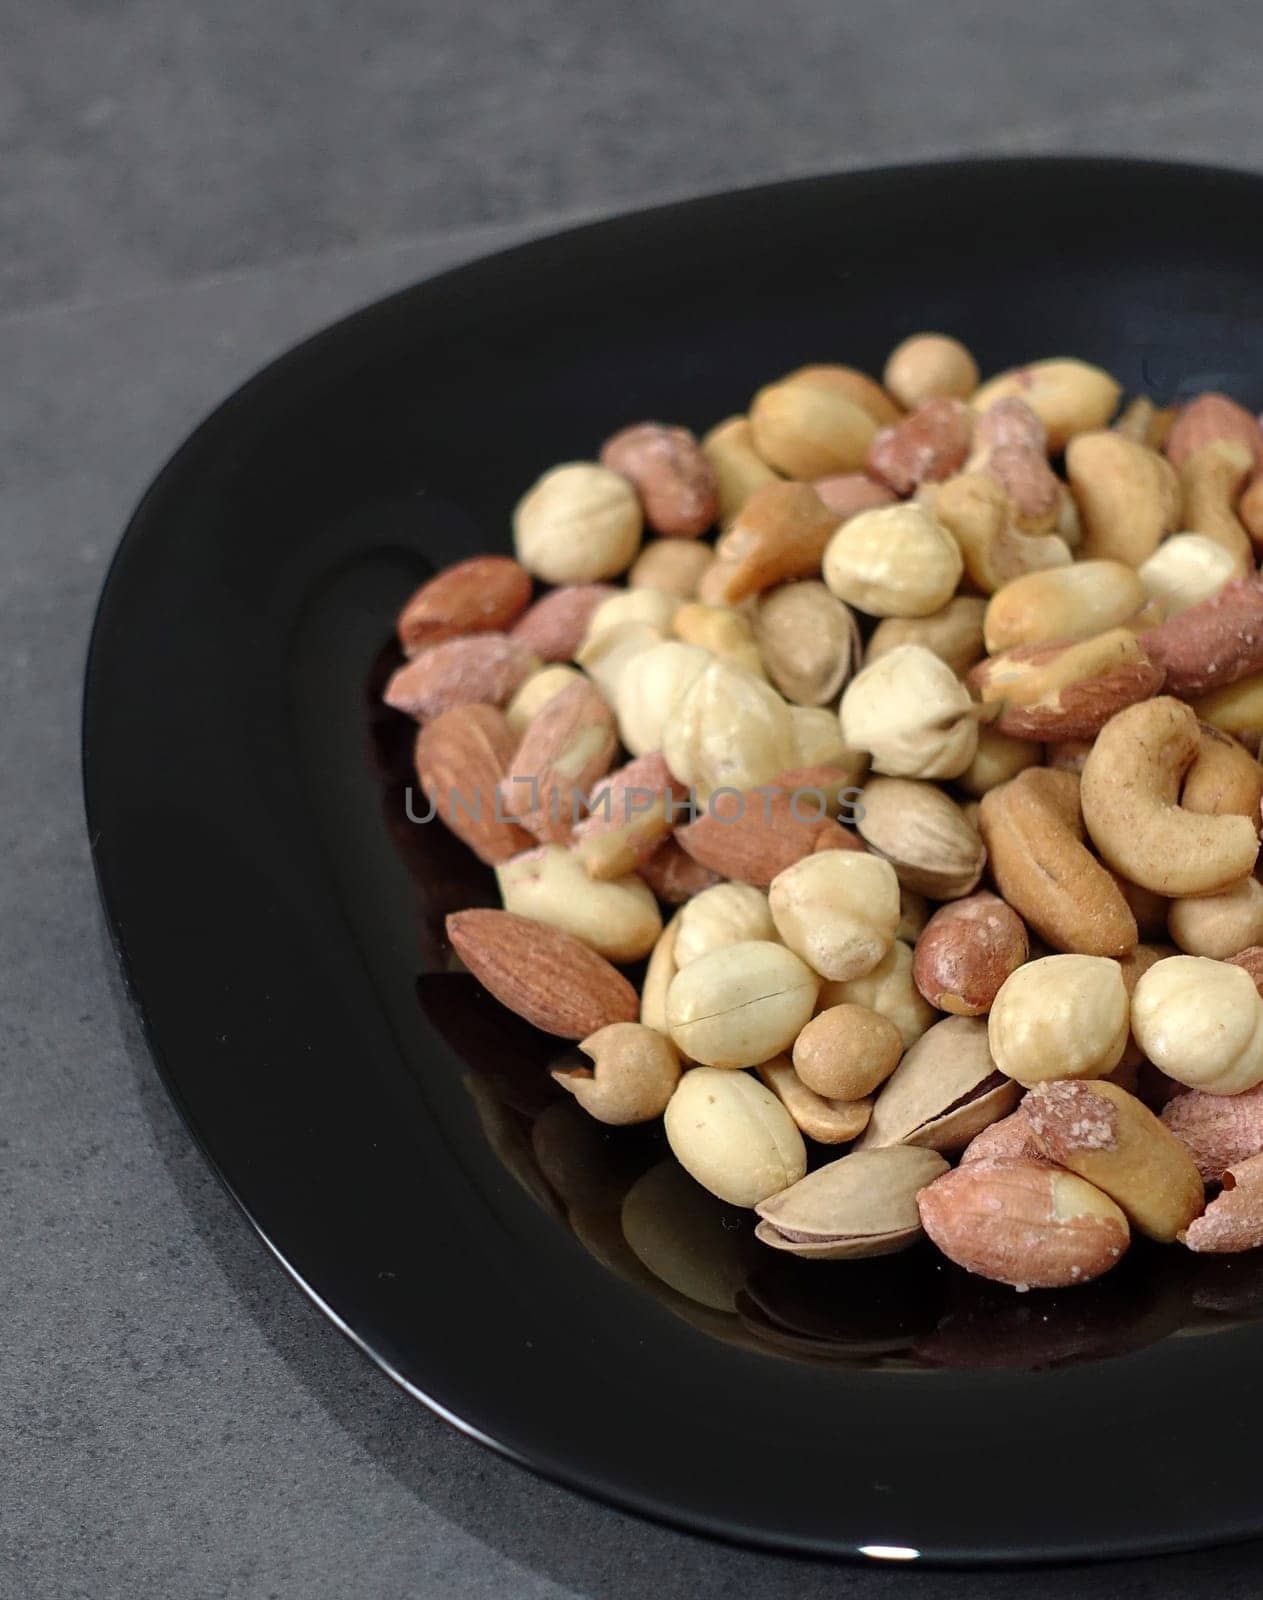 There is a plateful of nuts, hazelnuts, peanuts, cashews in the plate.